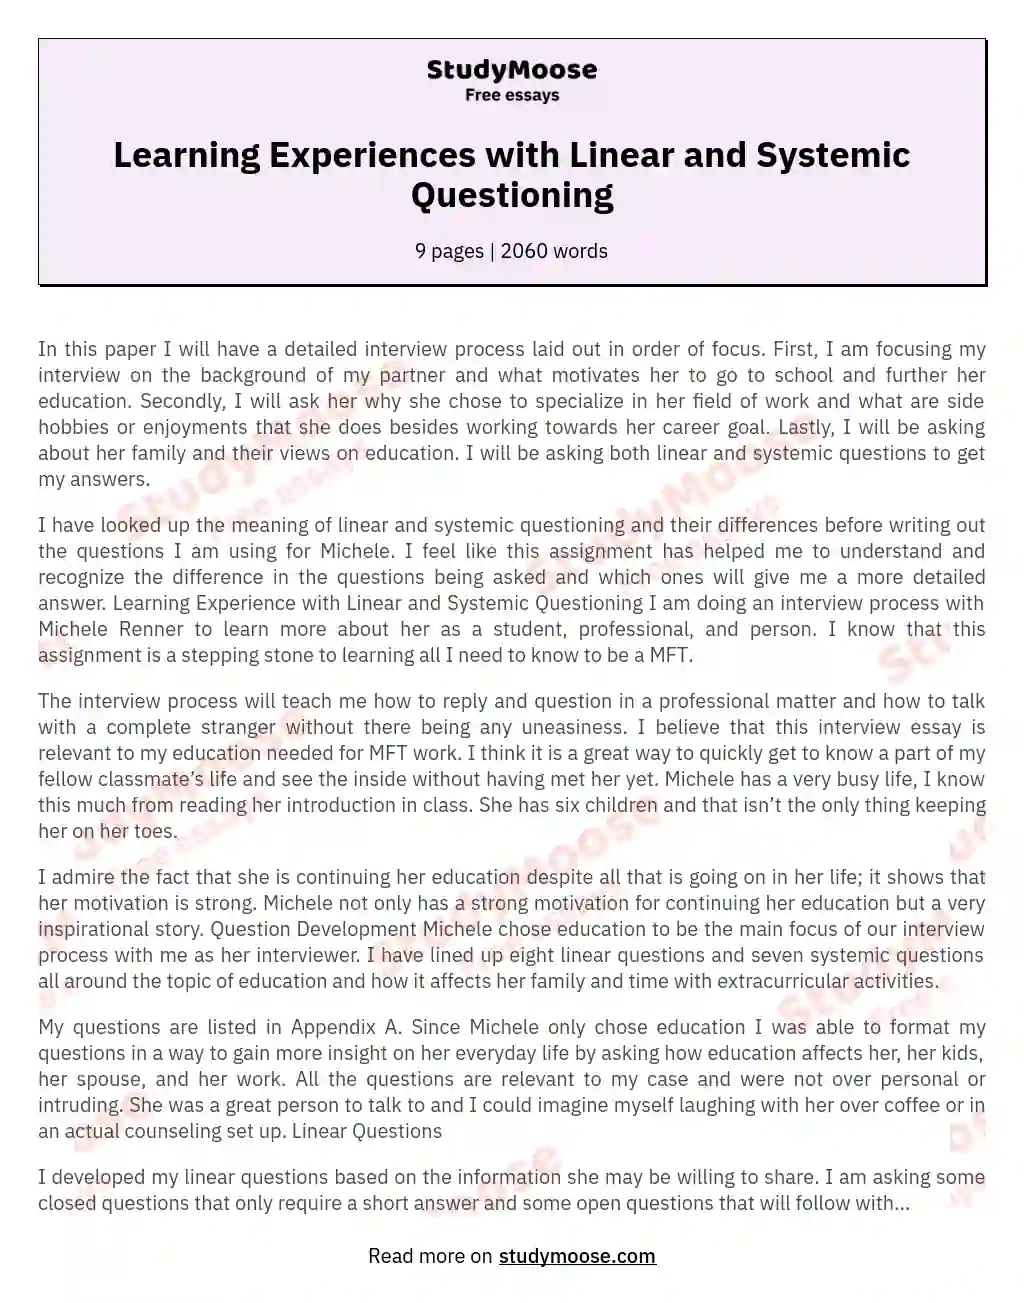 Learning Experiences with Linear and Systemic Questioning essay